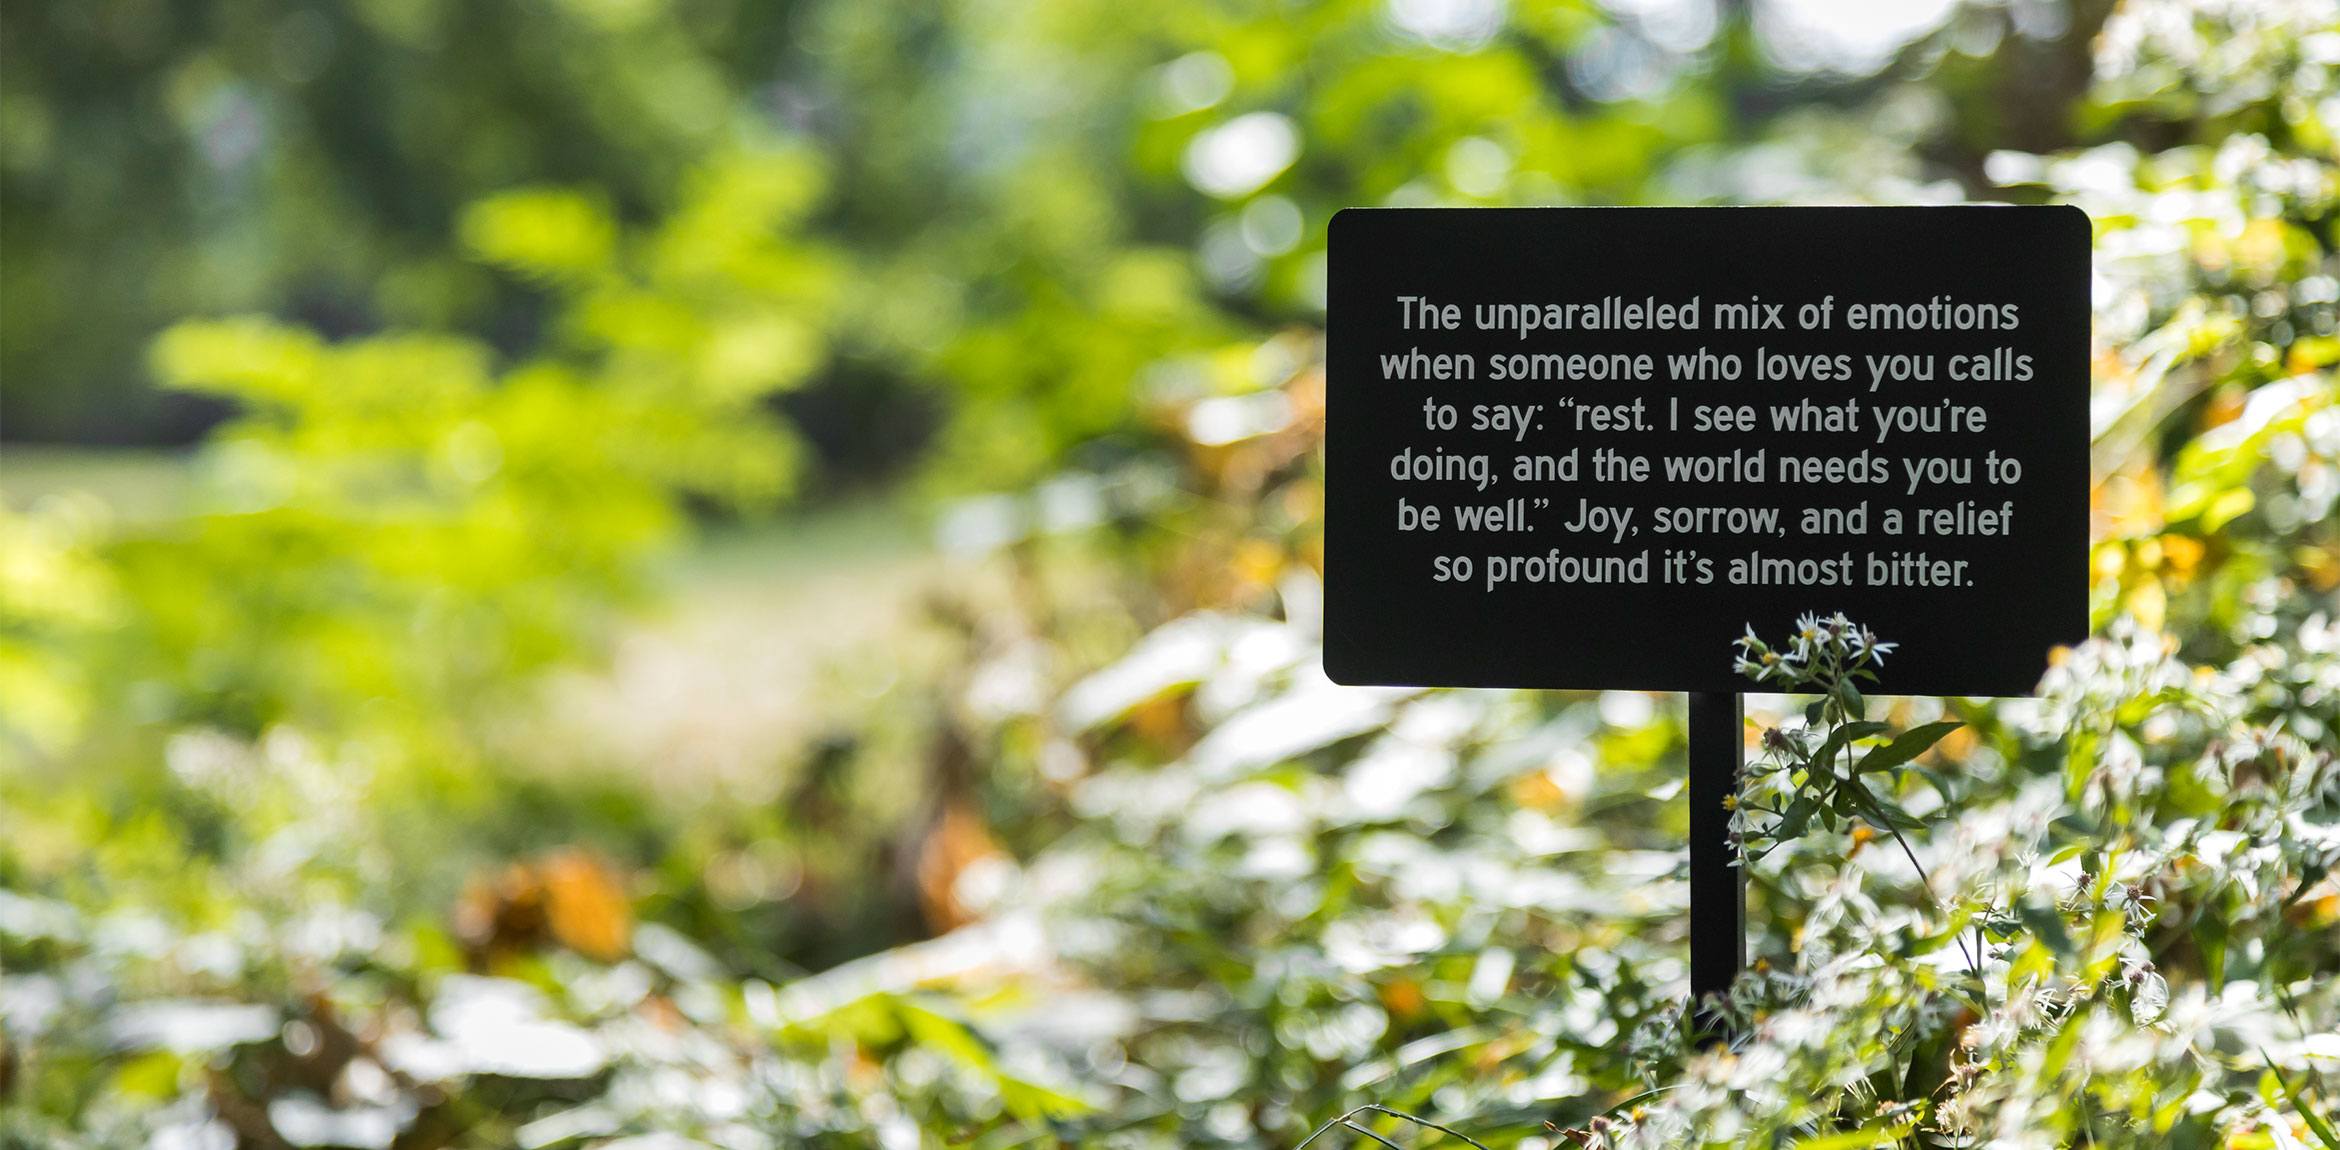 Chloë Bass' small aluminum sign, "The unparalleled mix of emotions when someone who loves you calls to say: rest. I see what you’re doing, and the world needs you to be well. Joy, sorrow, and a relief so profound it’s almost bitter" installed in a botanical patch.